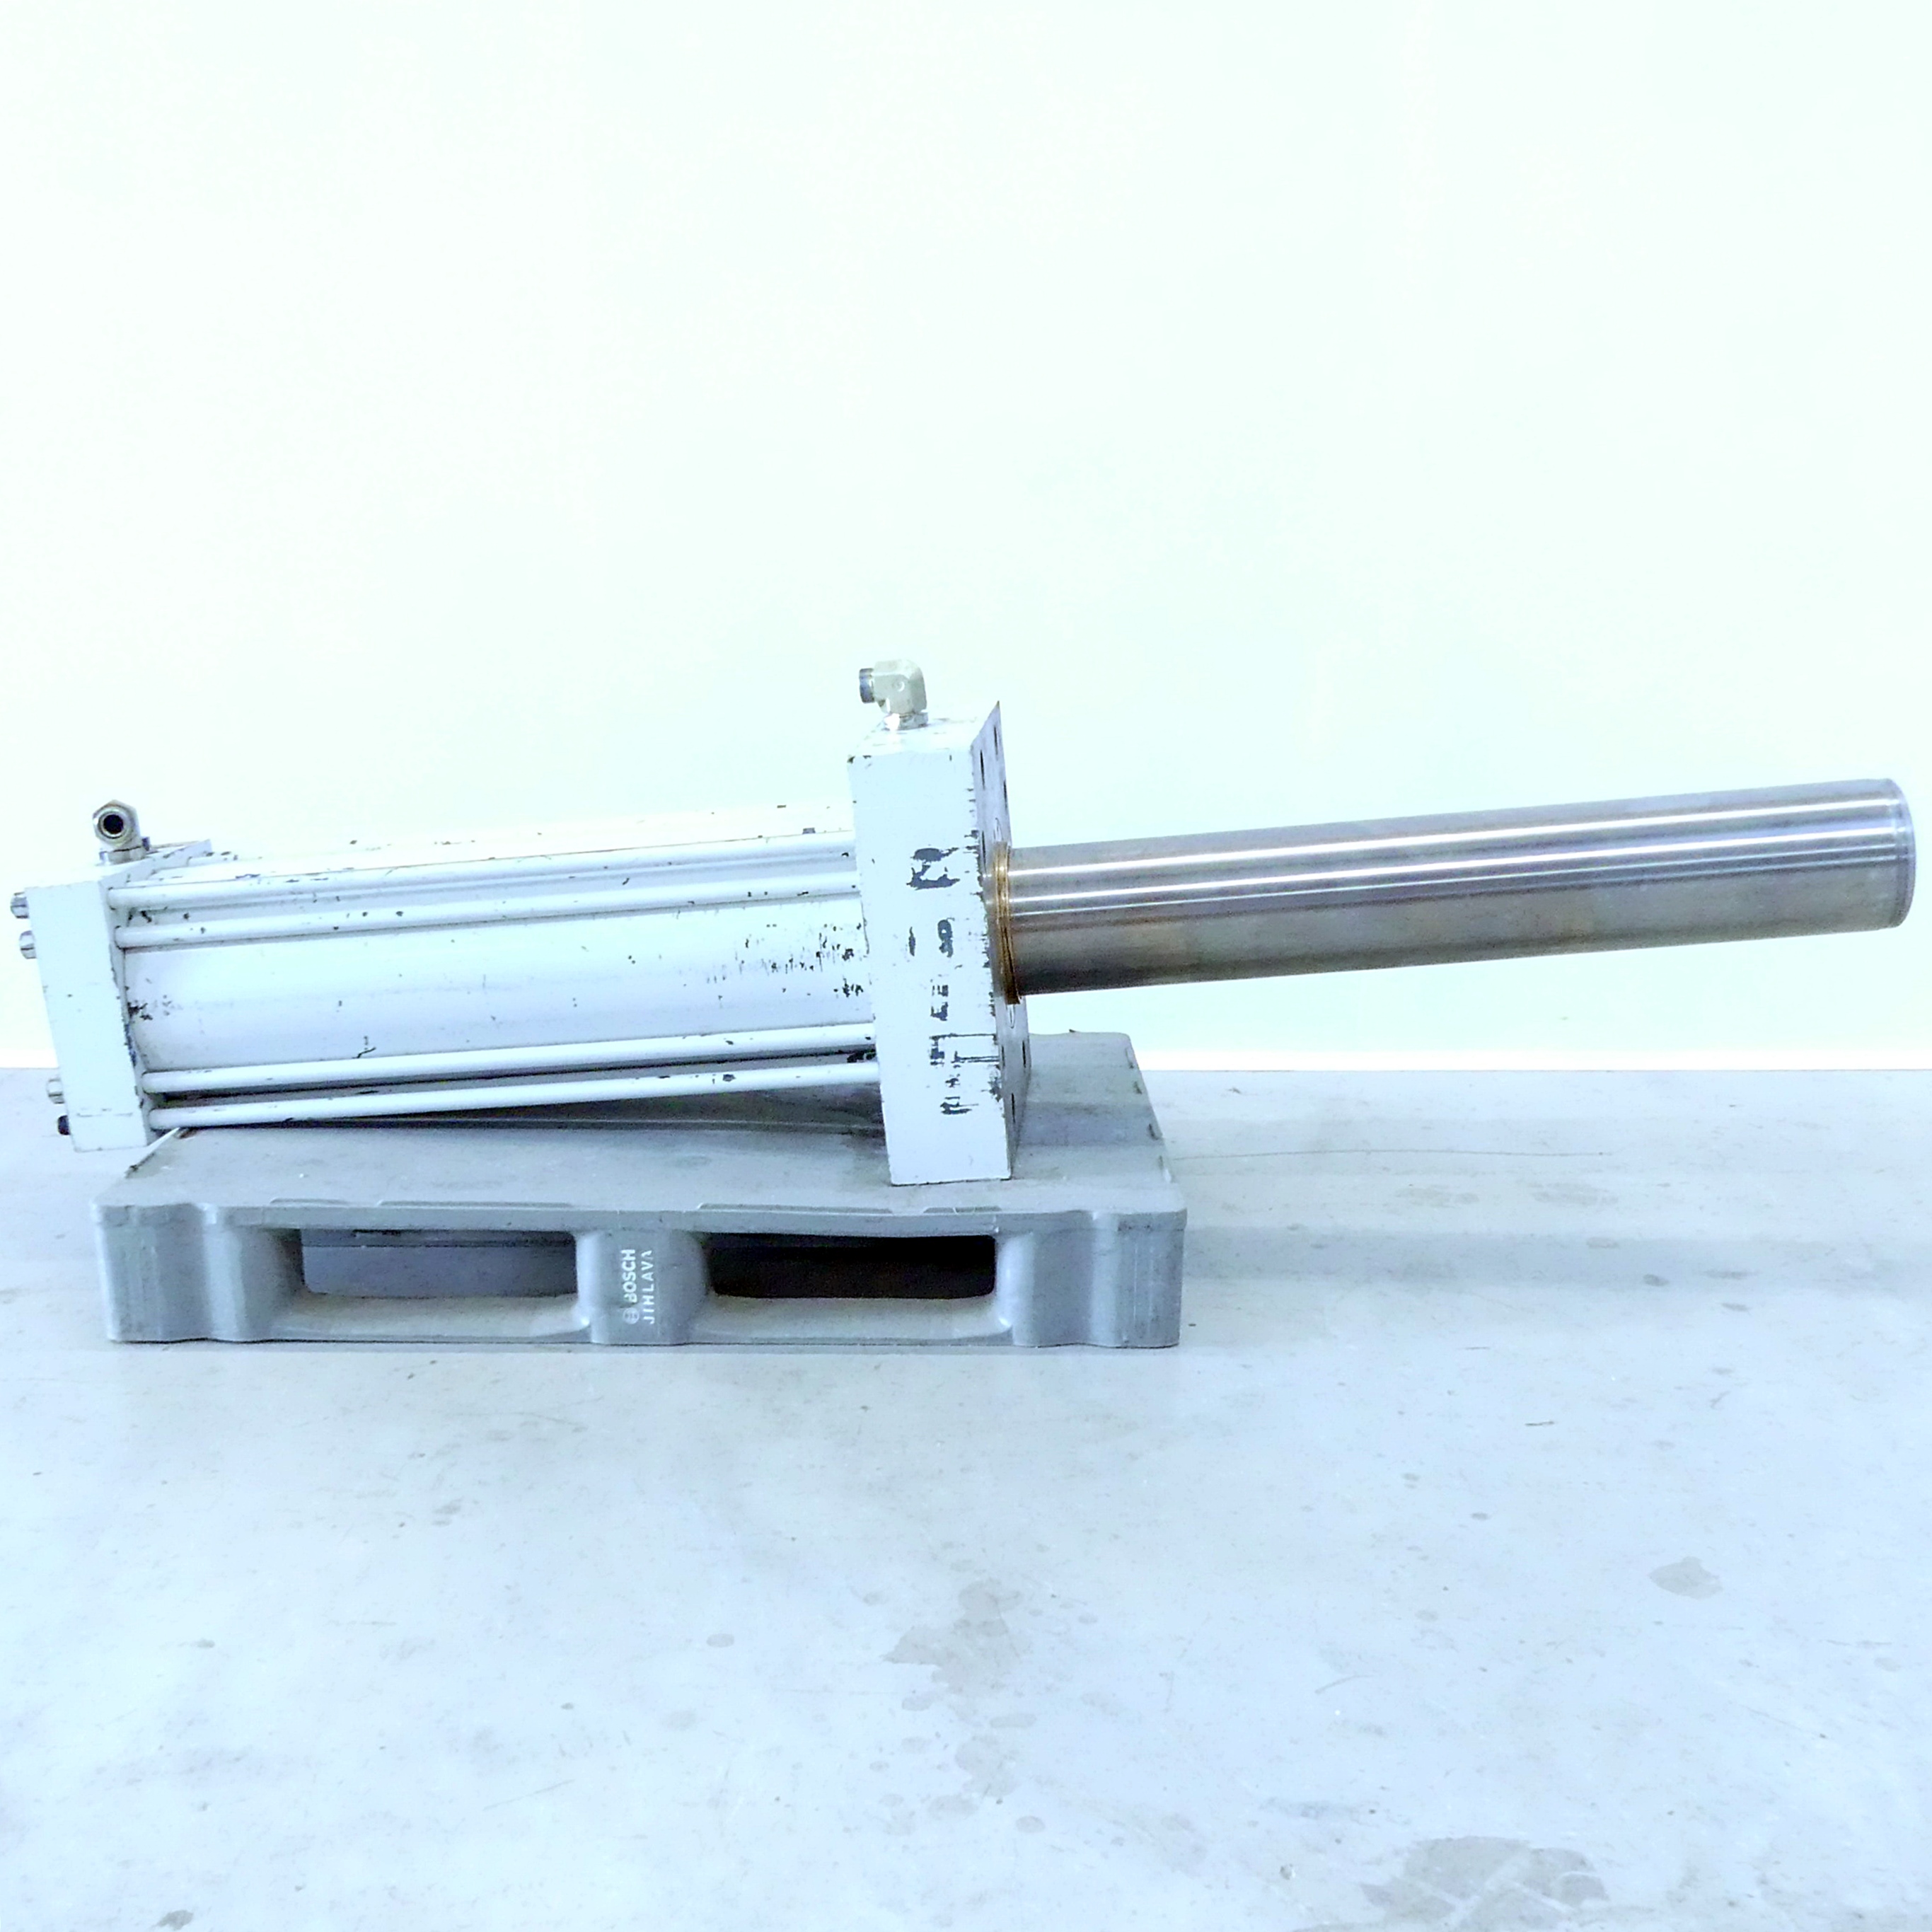 Hydraulic cylinder with extended piston rod (100cm) 10034751/621 